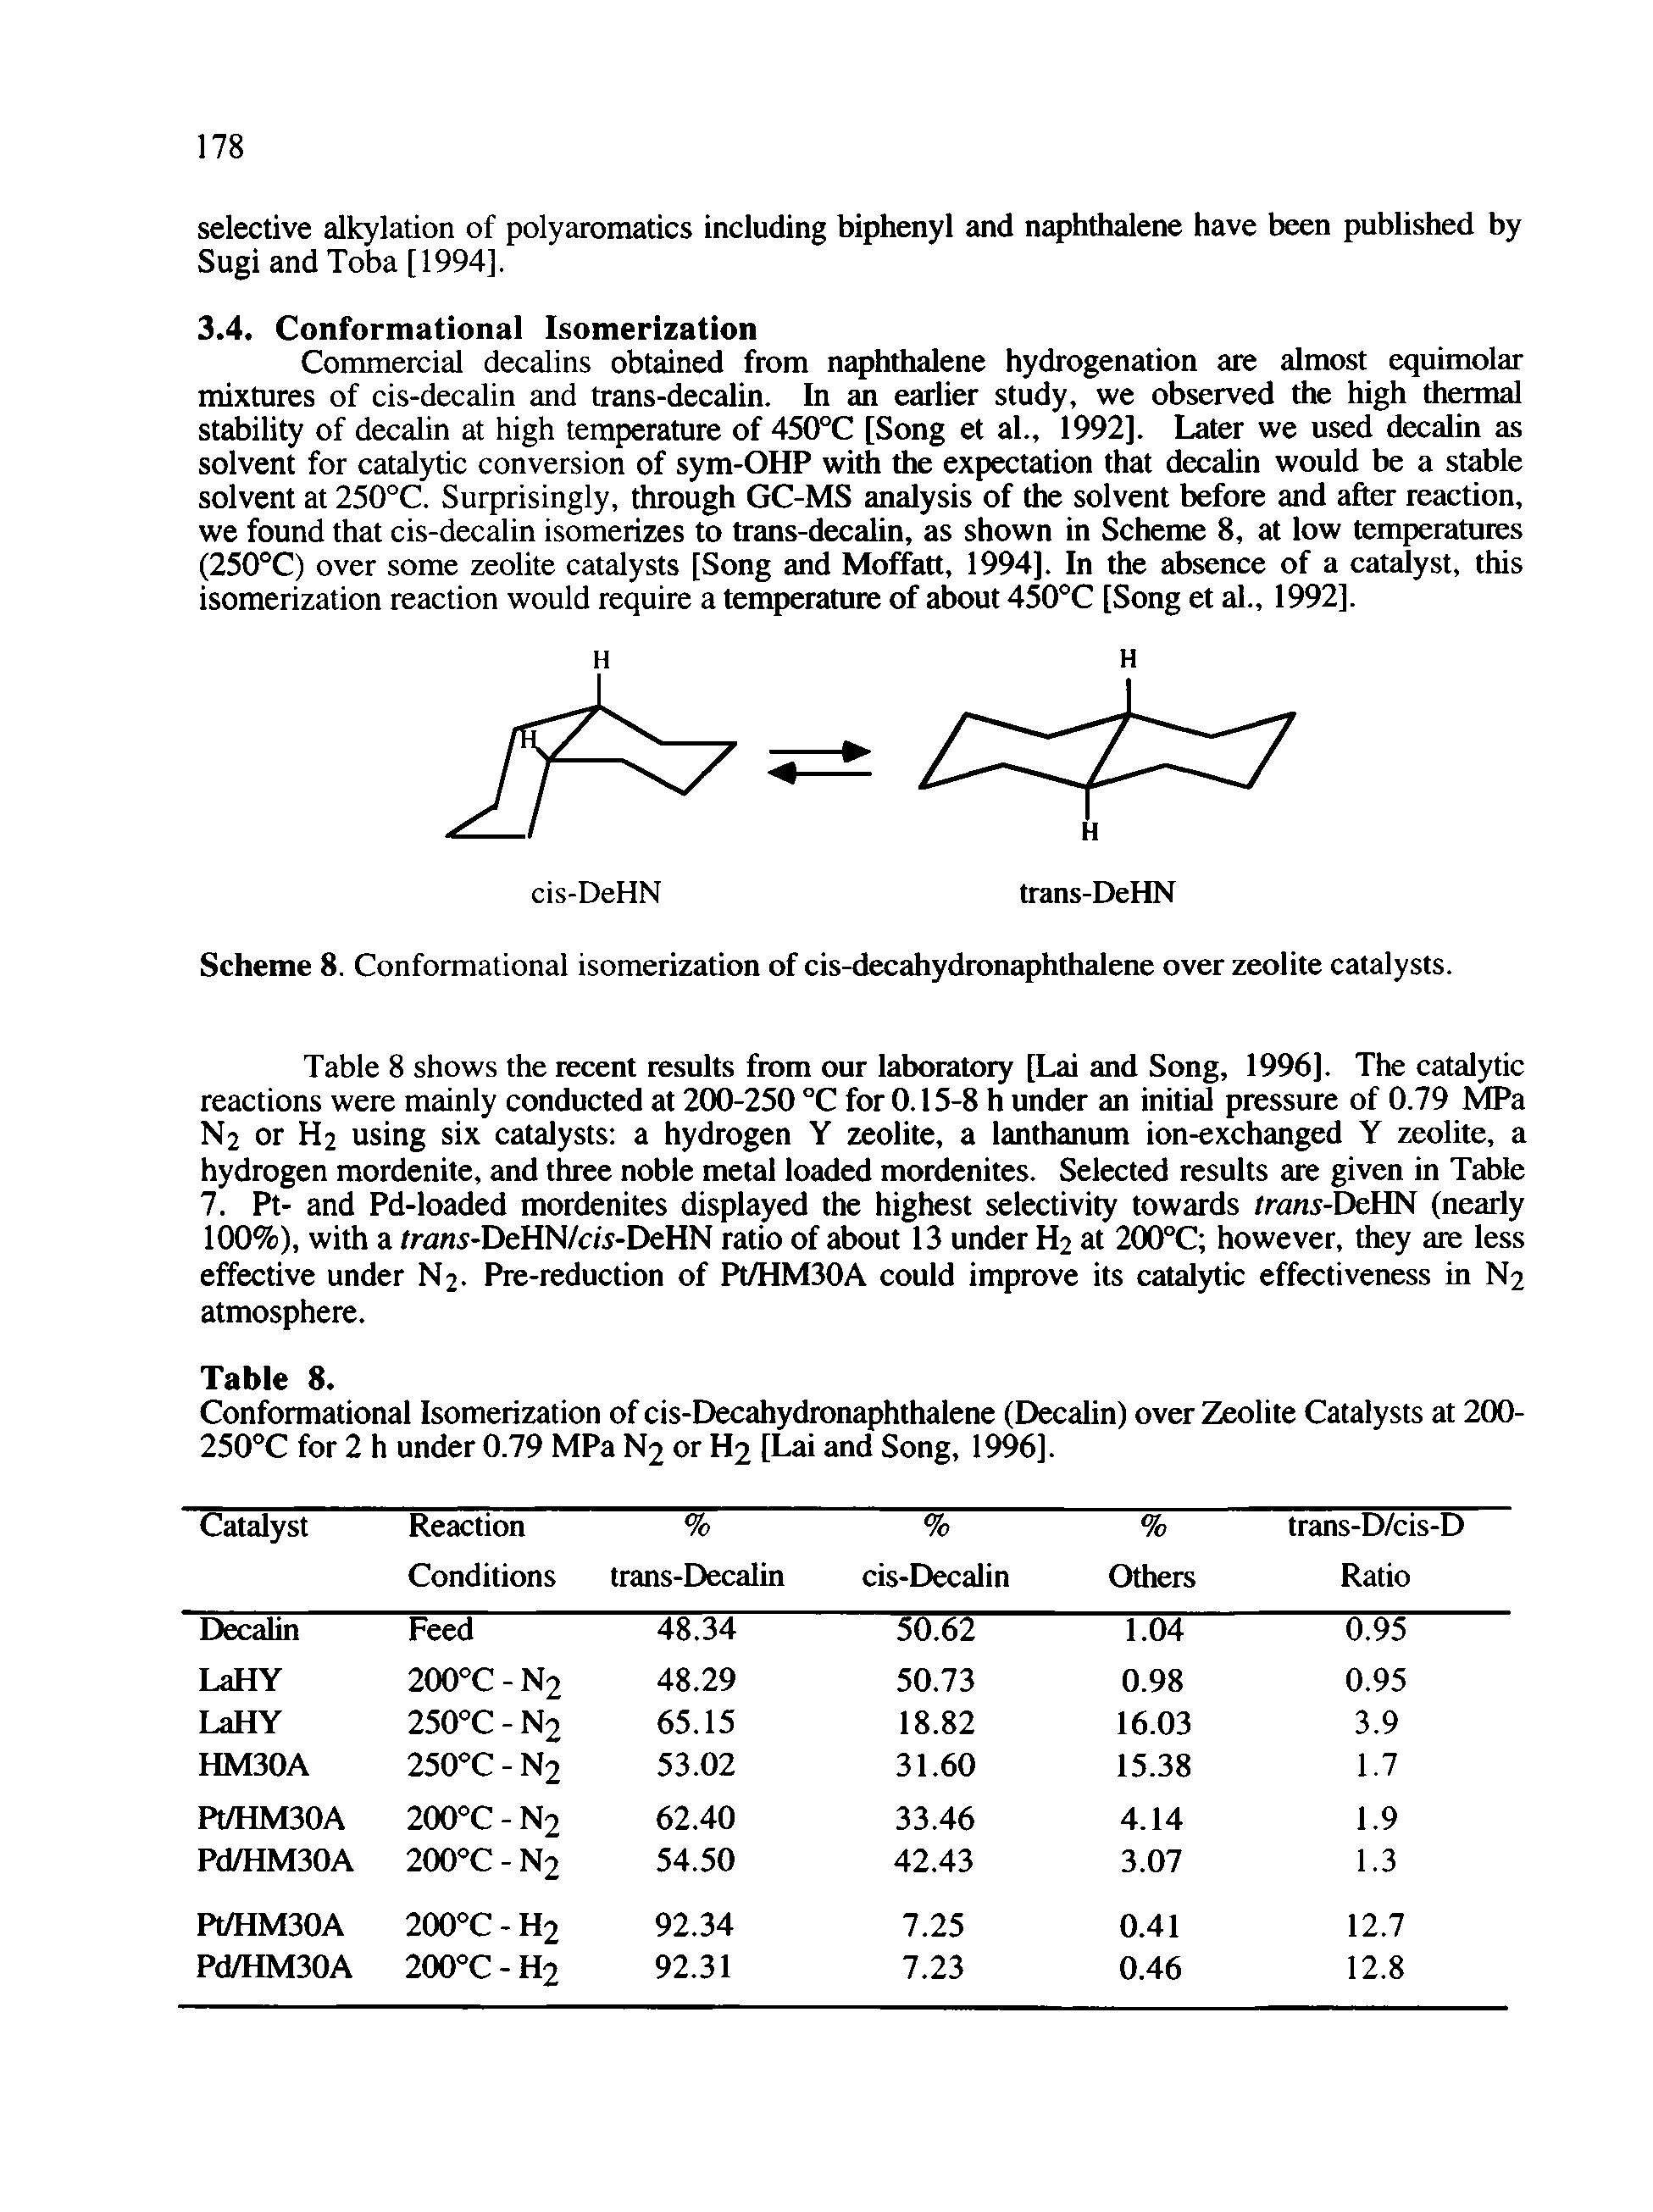 Table 8 shows the recent results from our laboratory [Lai and Song, 1996]. The catalytic reactions were mainly conducted at 200-250 °C for 0.15-8 h under an initial pressure of 0.79 h a N2 or H2 using six catalysts a hydrogen Y zeolite, a lanthanum ion-exchanged Y zeolite, a hydrogen mordenite, and three noble metal loaded mordenites. Selected results are given in Table 7. Pt- and Pd-loaded mordenites displayed the highest selectivity towards /rani-DeHN (nearly 100%), with a Zrani-DeHN/cw-DeHN ratio of about 13 under H2 at 2(X)°C however, they are less effective under N2. Pre-reduction of Pt/HM30A could improve its catalytic effectiveness in N2 atmosphere.